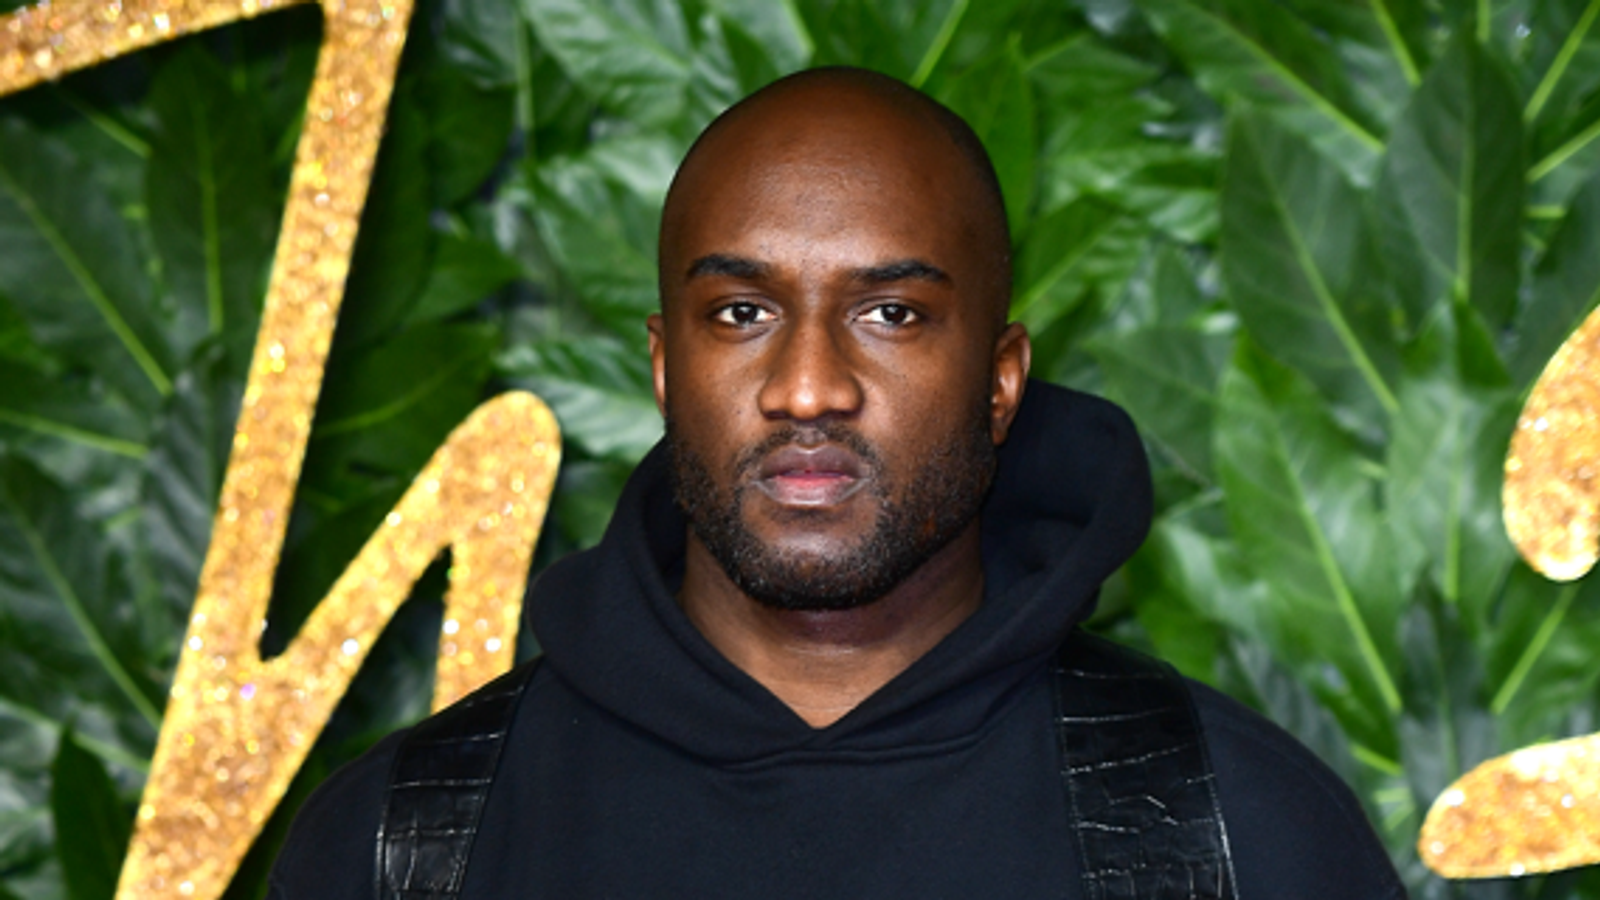 Virgil Abloh: Louis Vuitton designer who founded fashion label Off-White dies aged 41